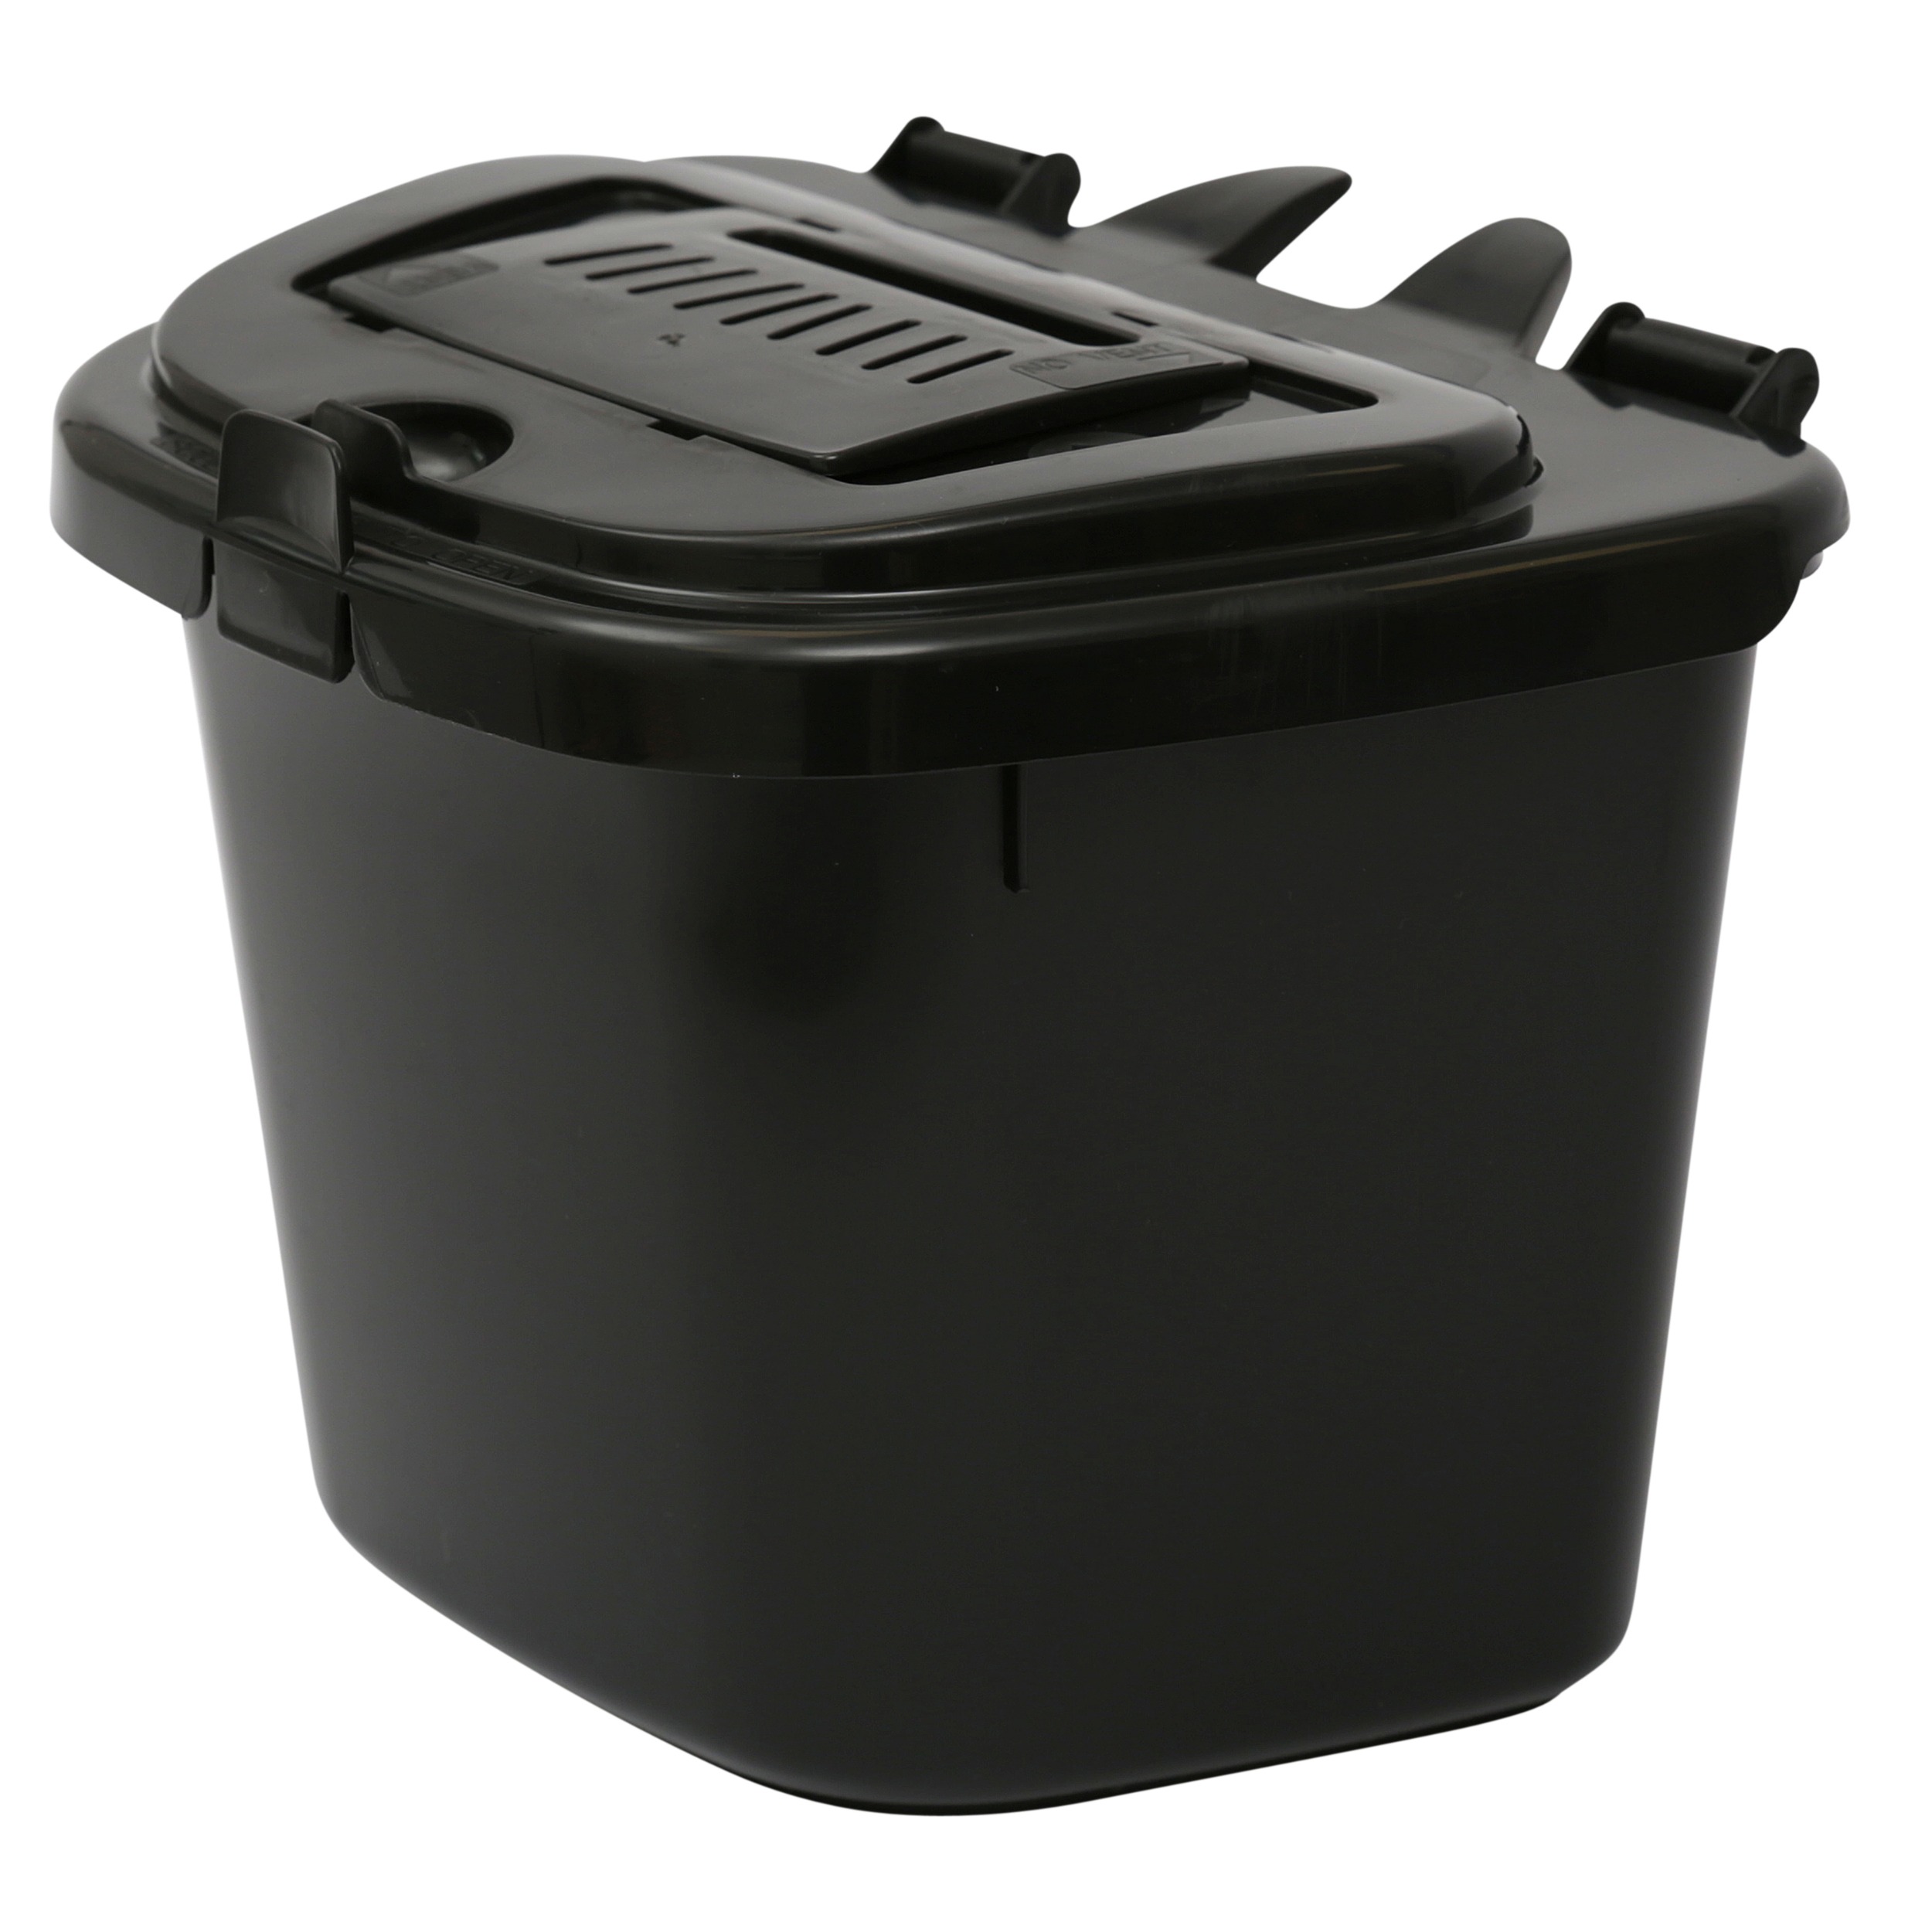 Vented Caddy - Black - 5L size